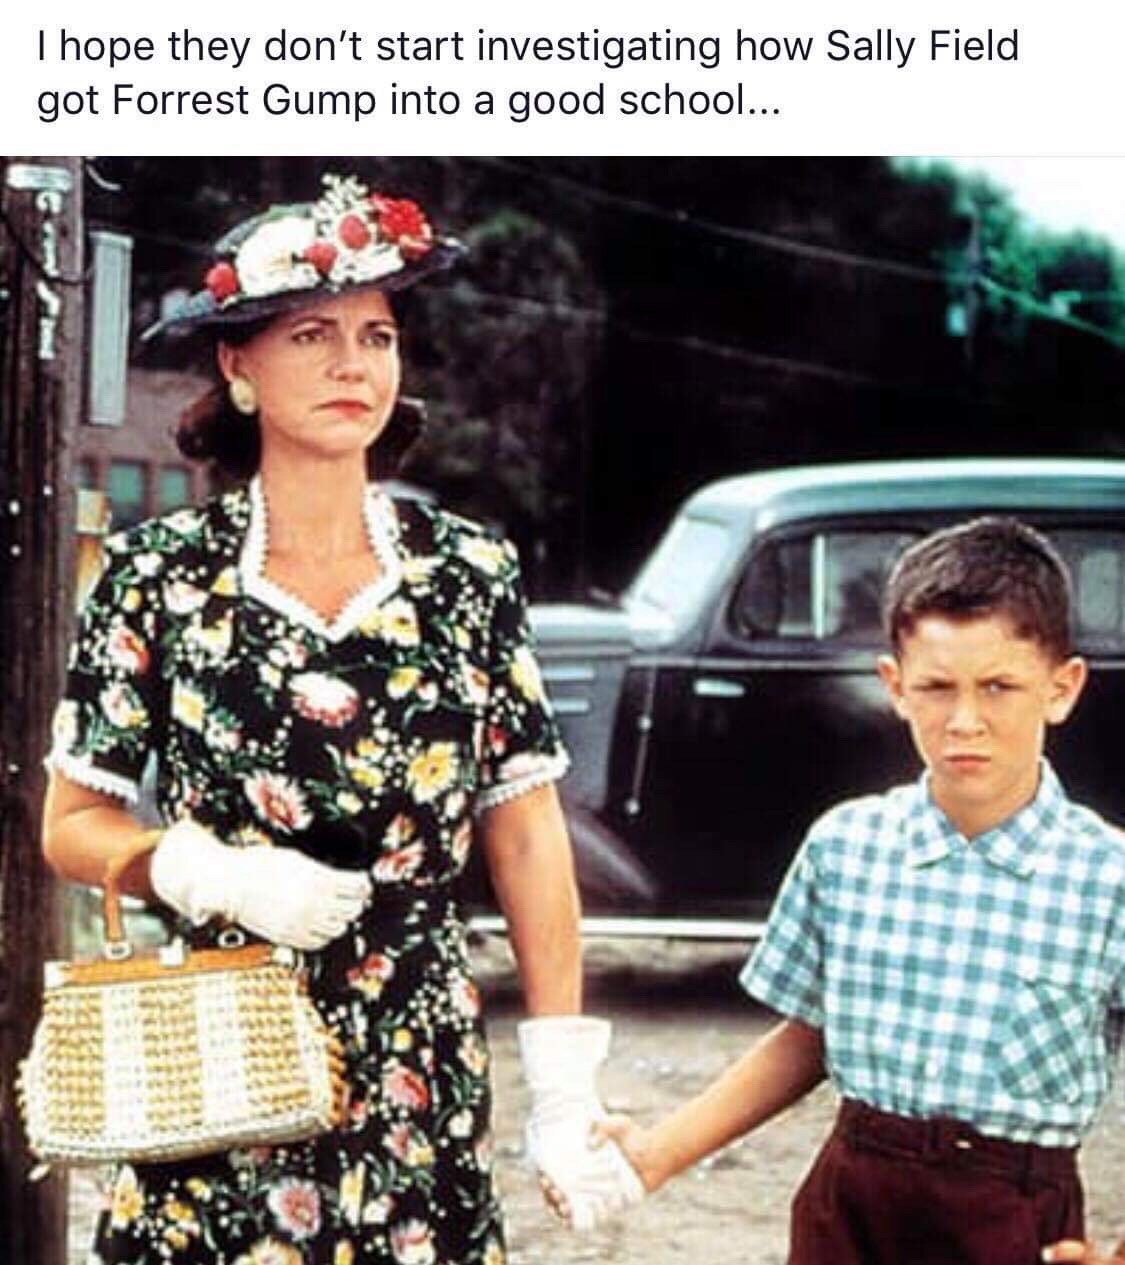 forrest gump mom - I hope they don't start investigating how Sally Field got Forrest Gump into a good school...